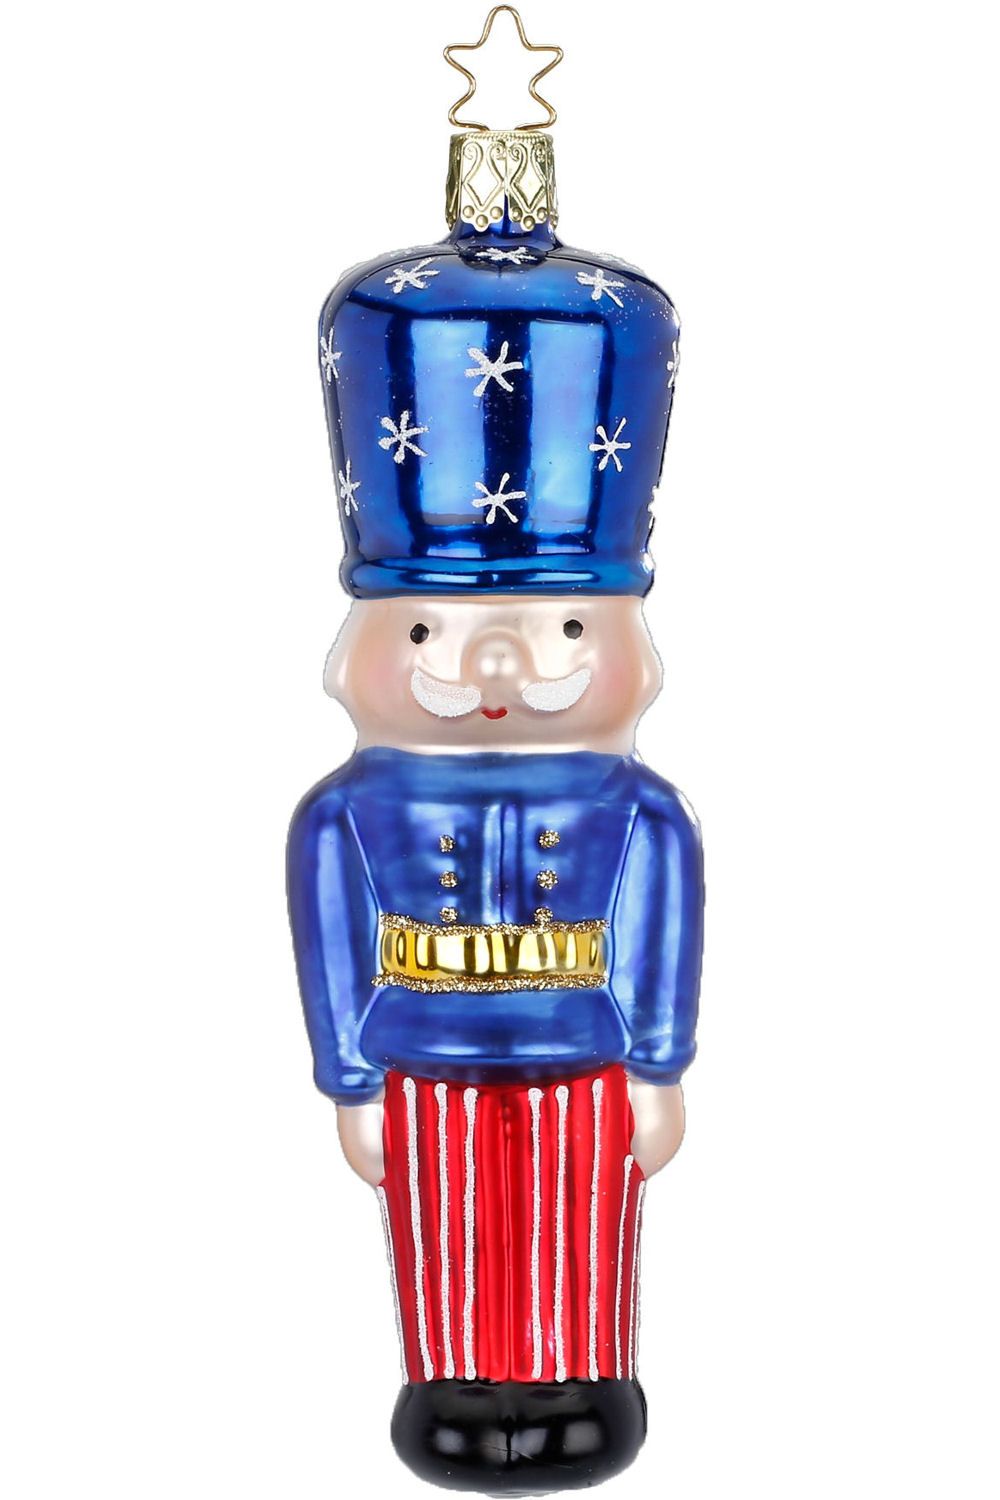 Patriotic Toy Soldier, Standing Proud, Red White Blue